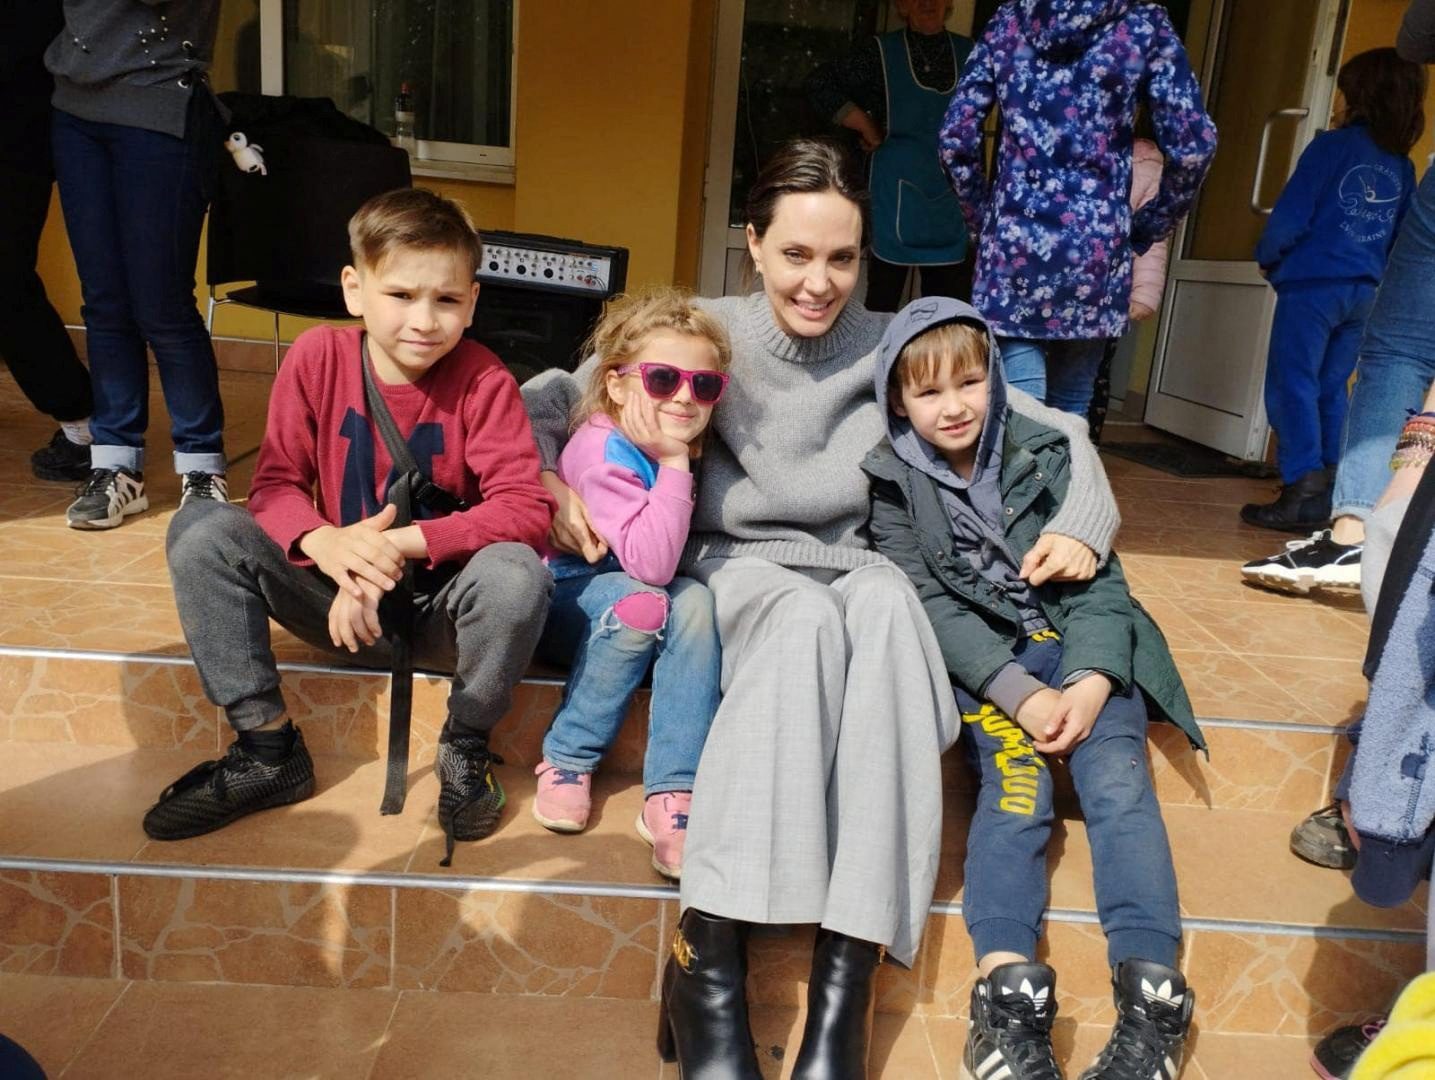 U.S. actor and UNHCR Special Envoy Angelina Jolie poses for a picture with children, as Russia's attack on Ukraine continues, in Lviv, Ukraine April 30, 2022.